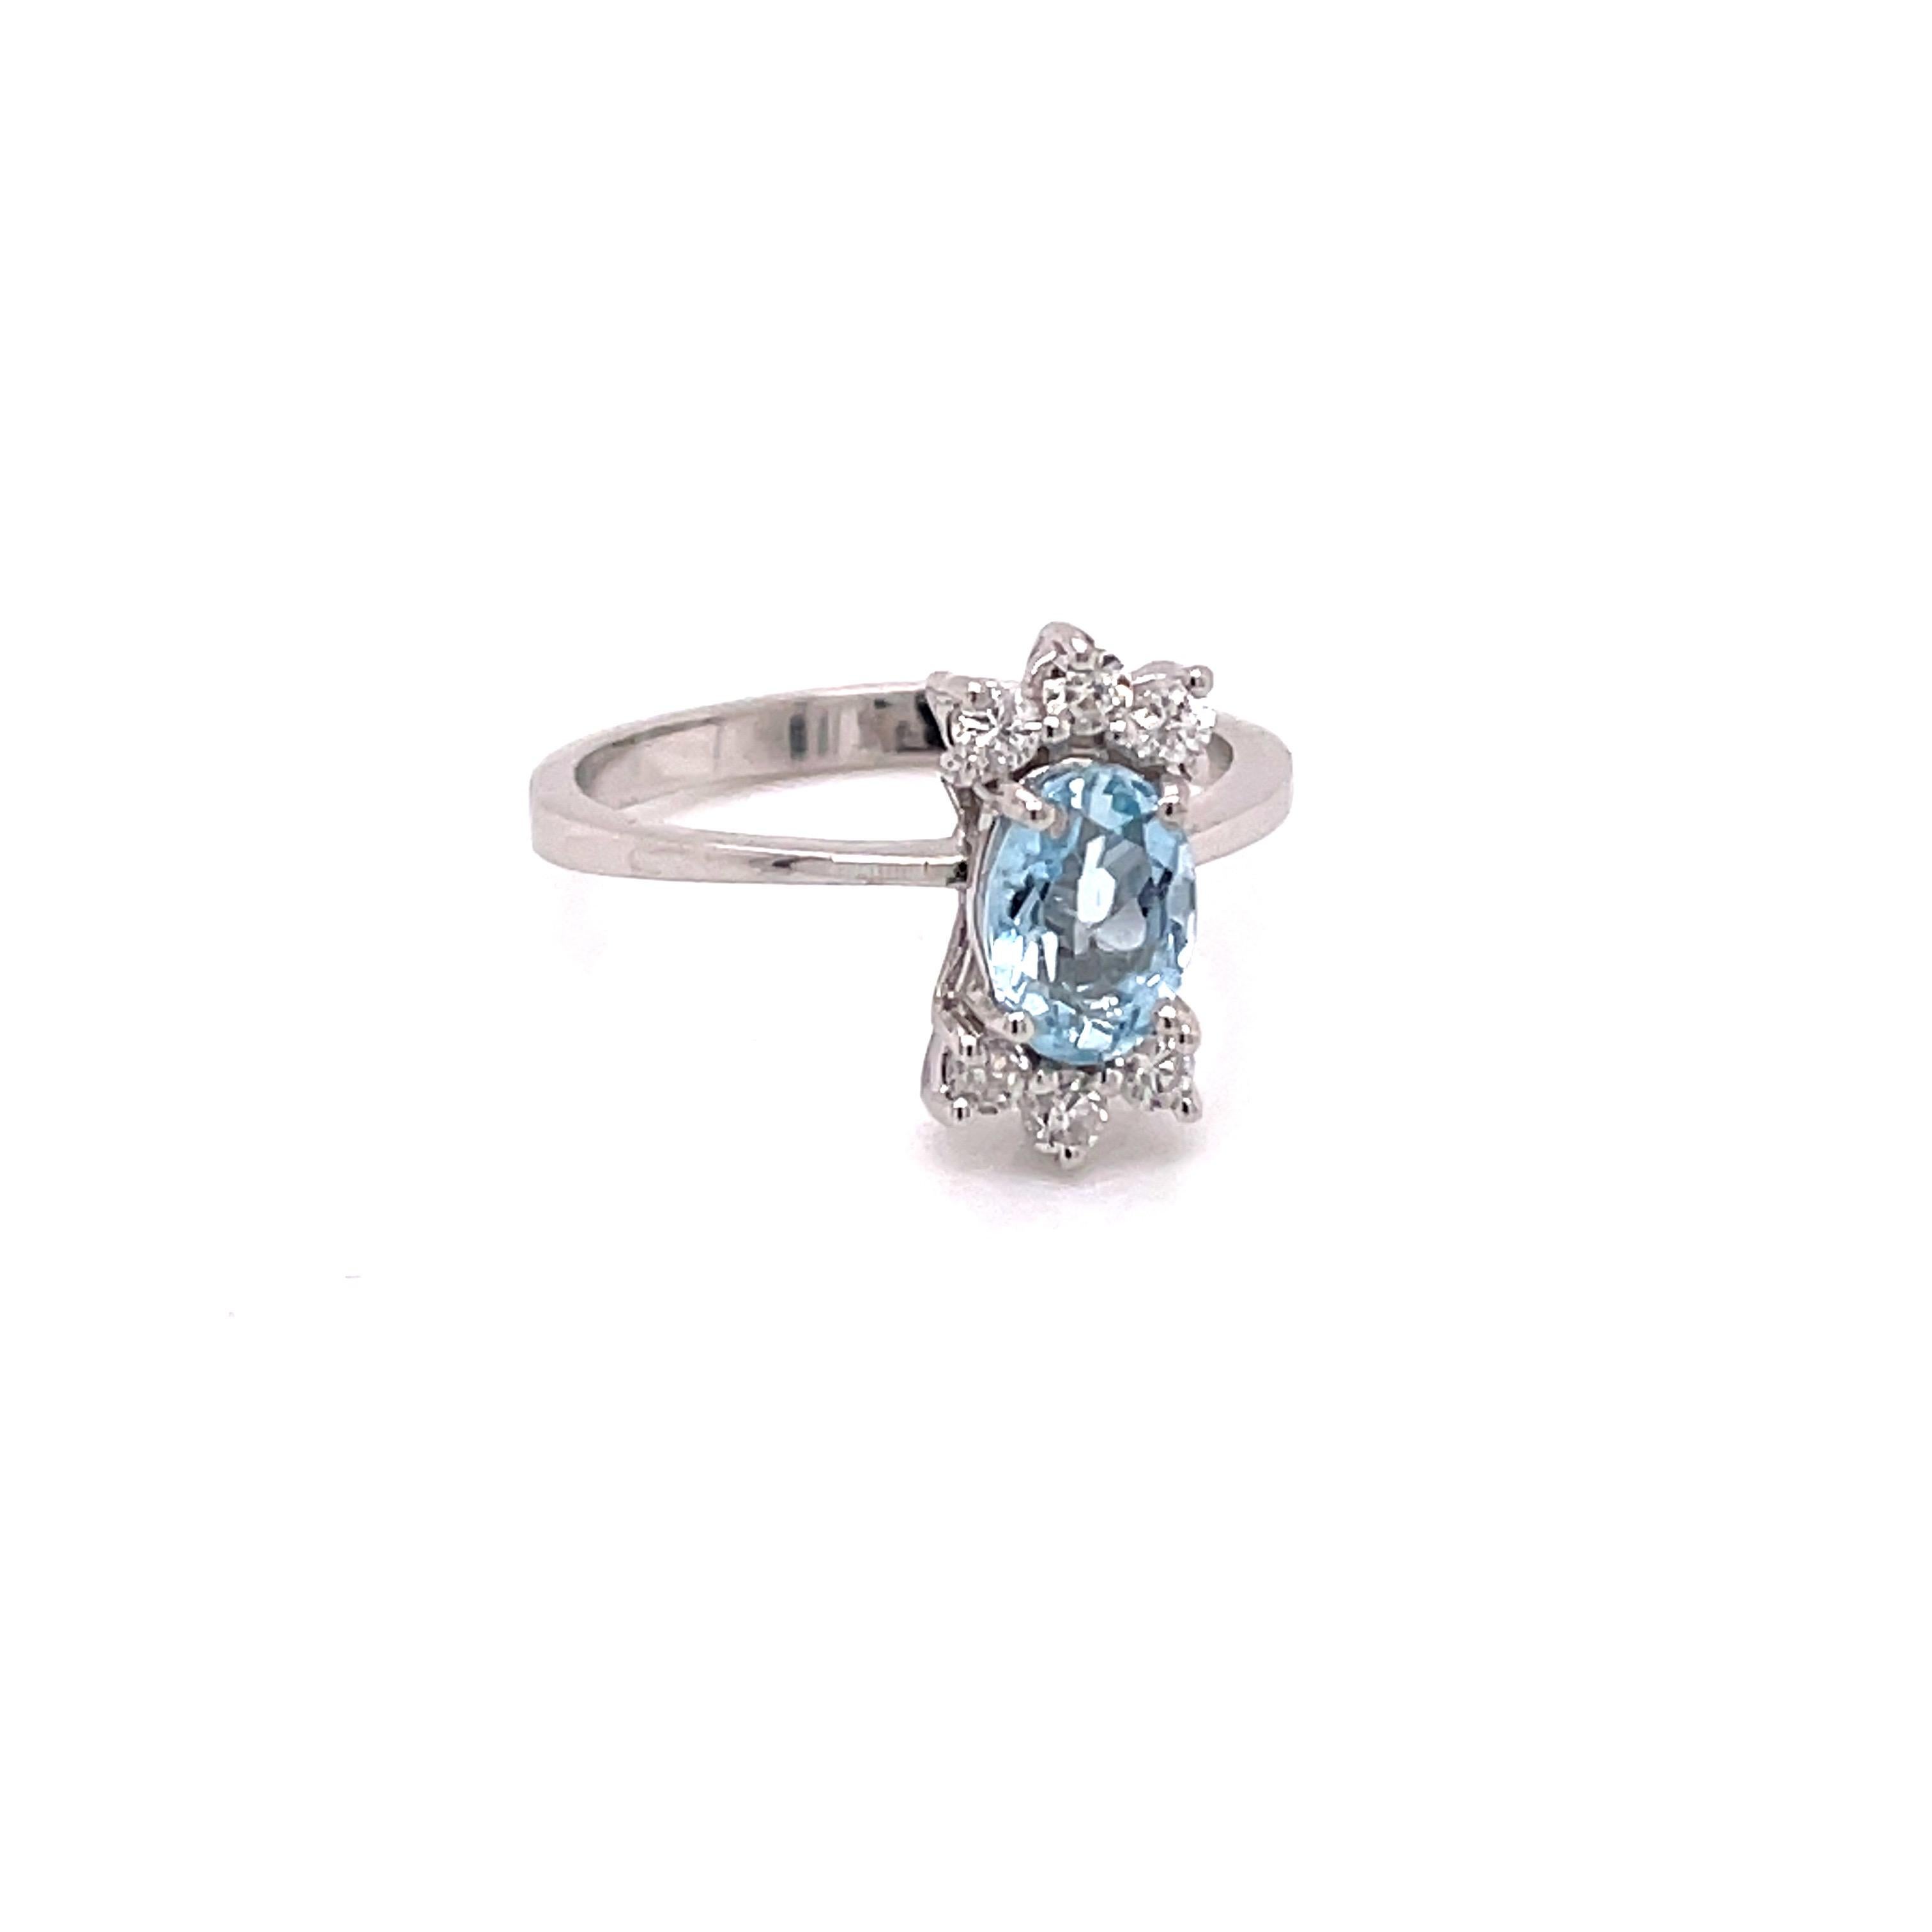 Vintage 1960's .75ct Oval Cut Aquamarine ring with Diamonds - The aquamarine weighs approximately .75ct and measures 7.3 x 5mm.  It is accented with 6 round brilliant diamonds weighing approximately .24ct G -H color SI clarity.  The setting is 14k